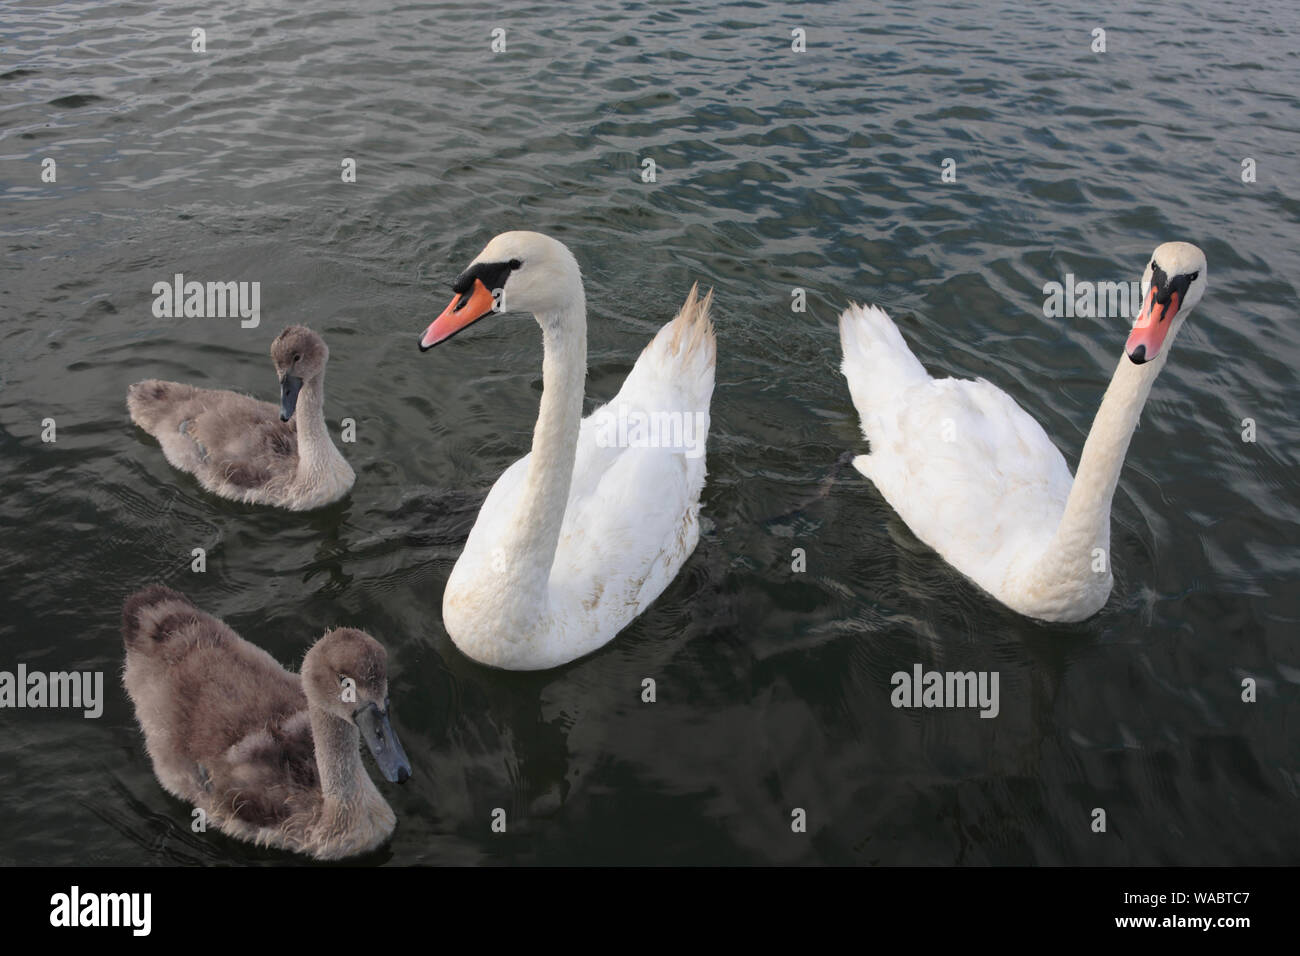 Early morning on the Lynher or St Germans River at Antony Passage, Cornwall, UK: a family of swans visit for food Stock Photo